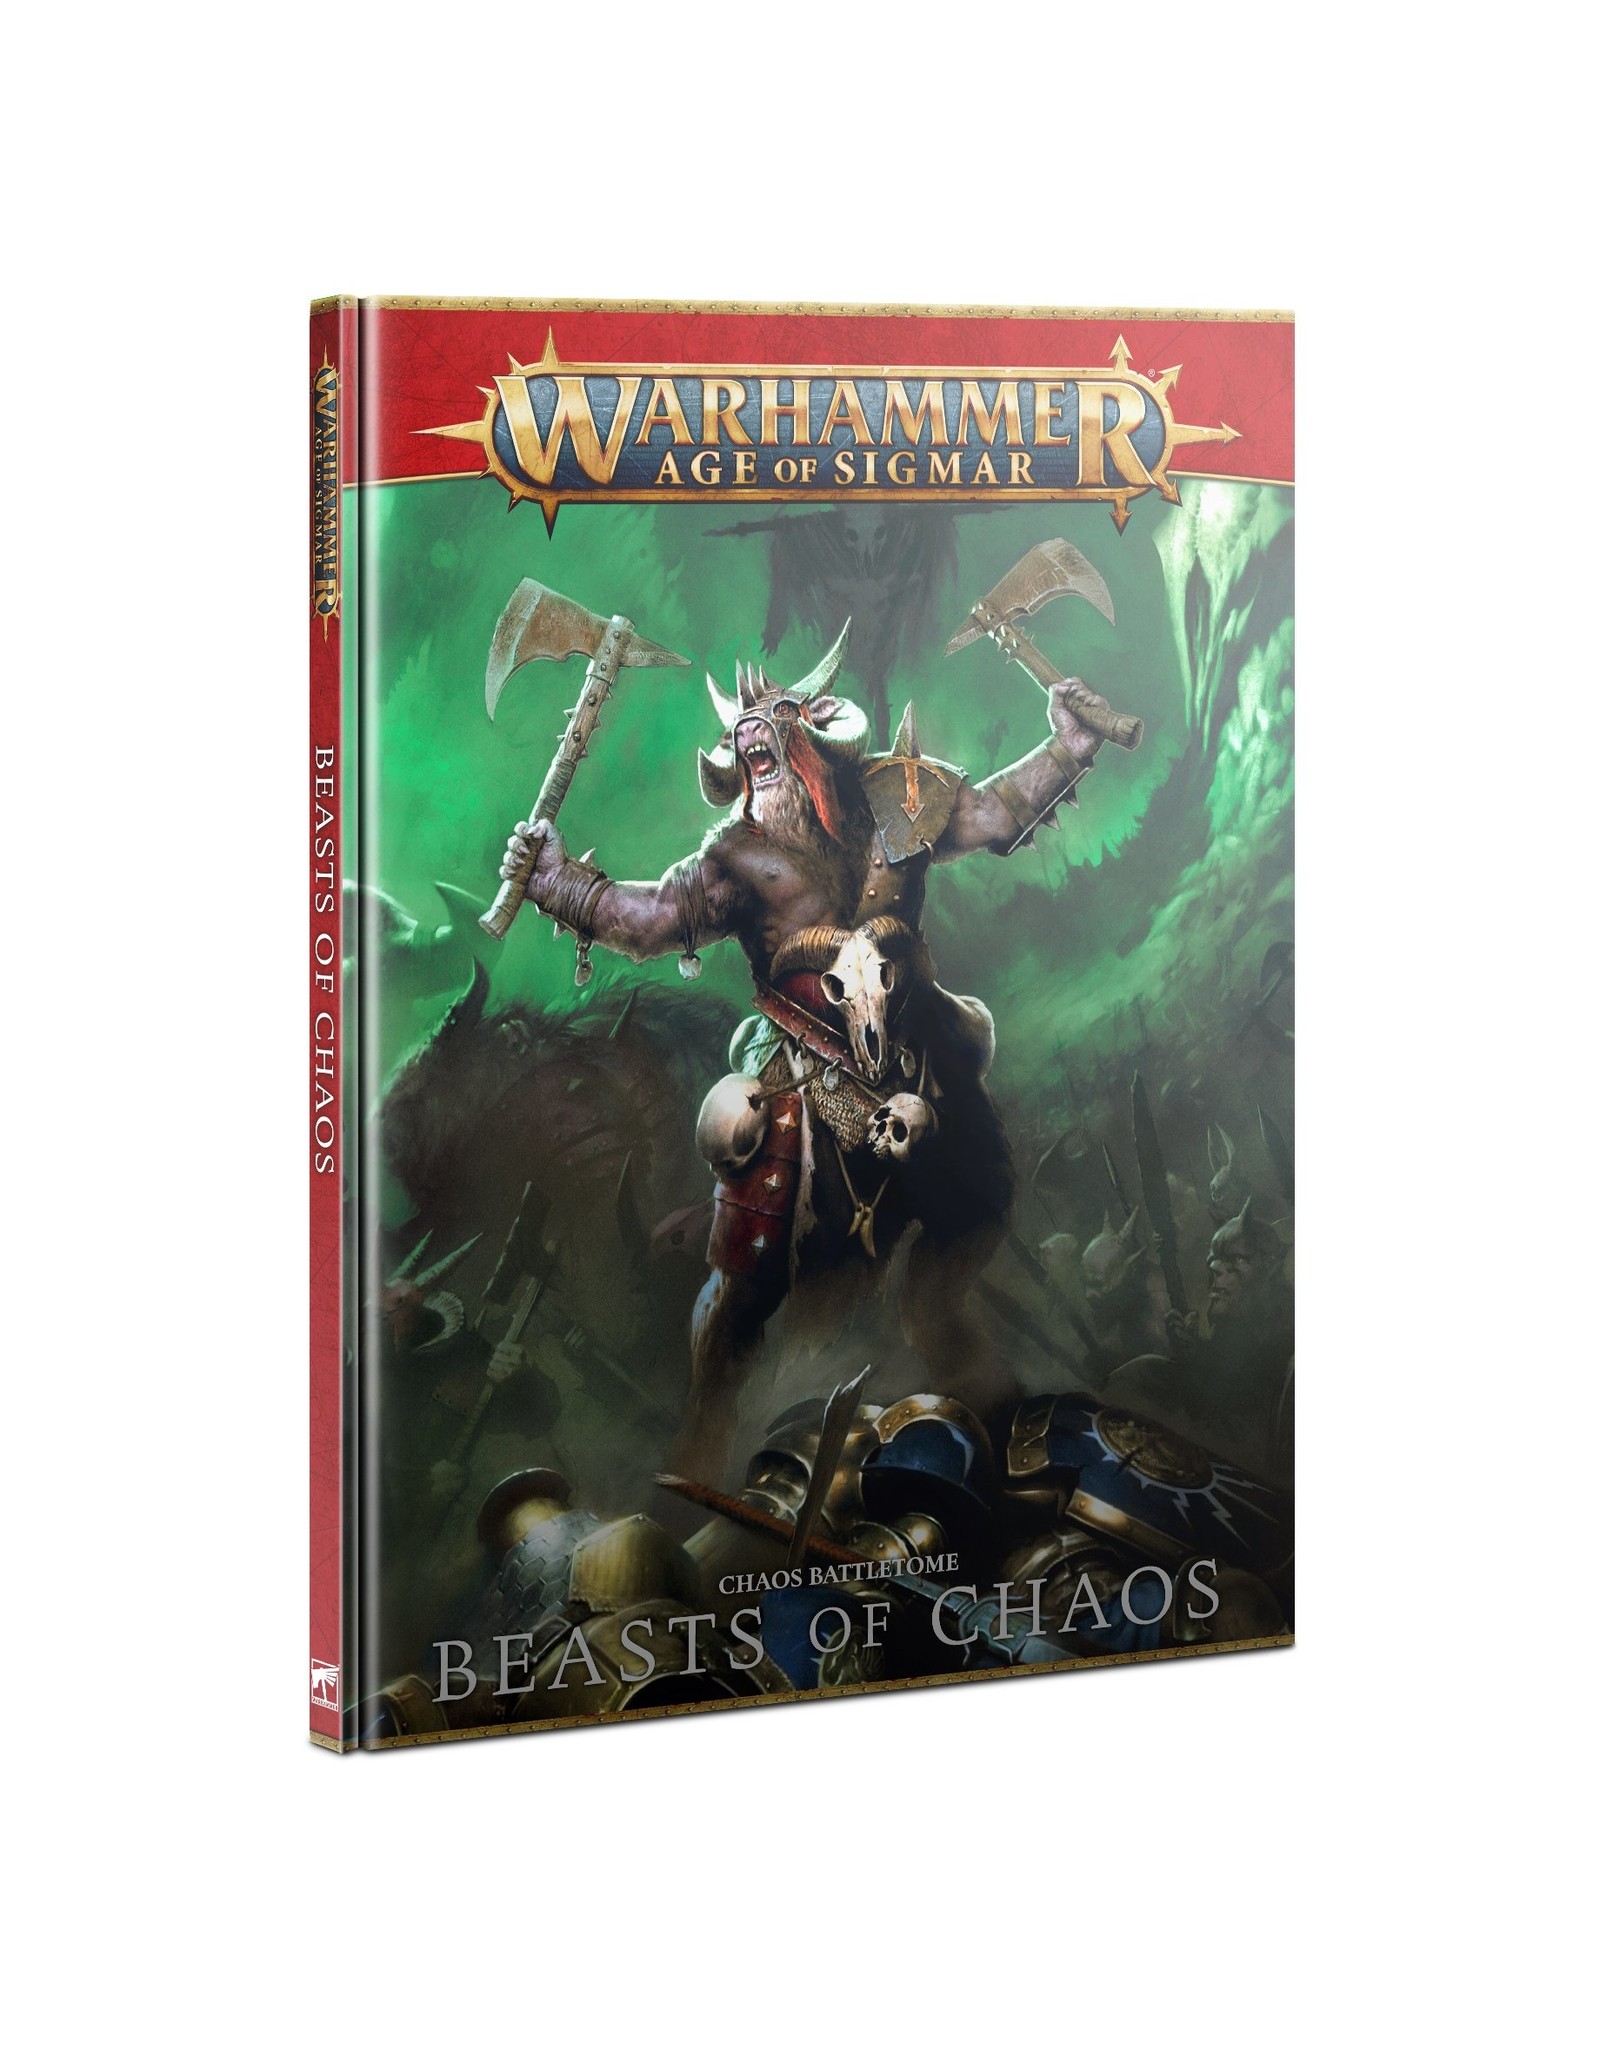 Age of Sigmar Battletome: Beasts Of Chaos (HB)